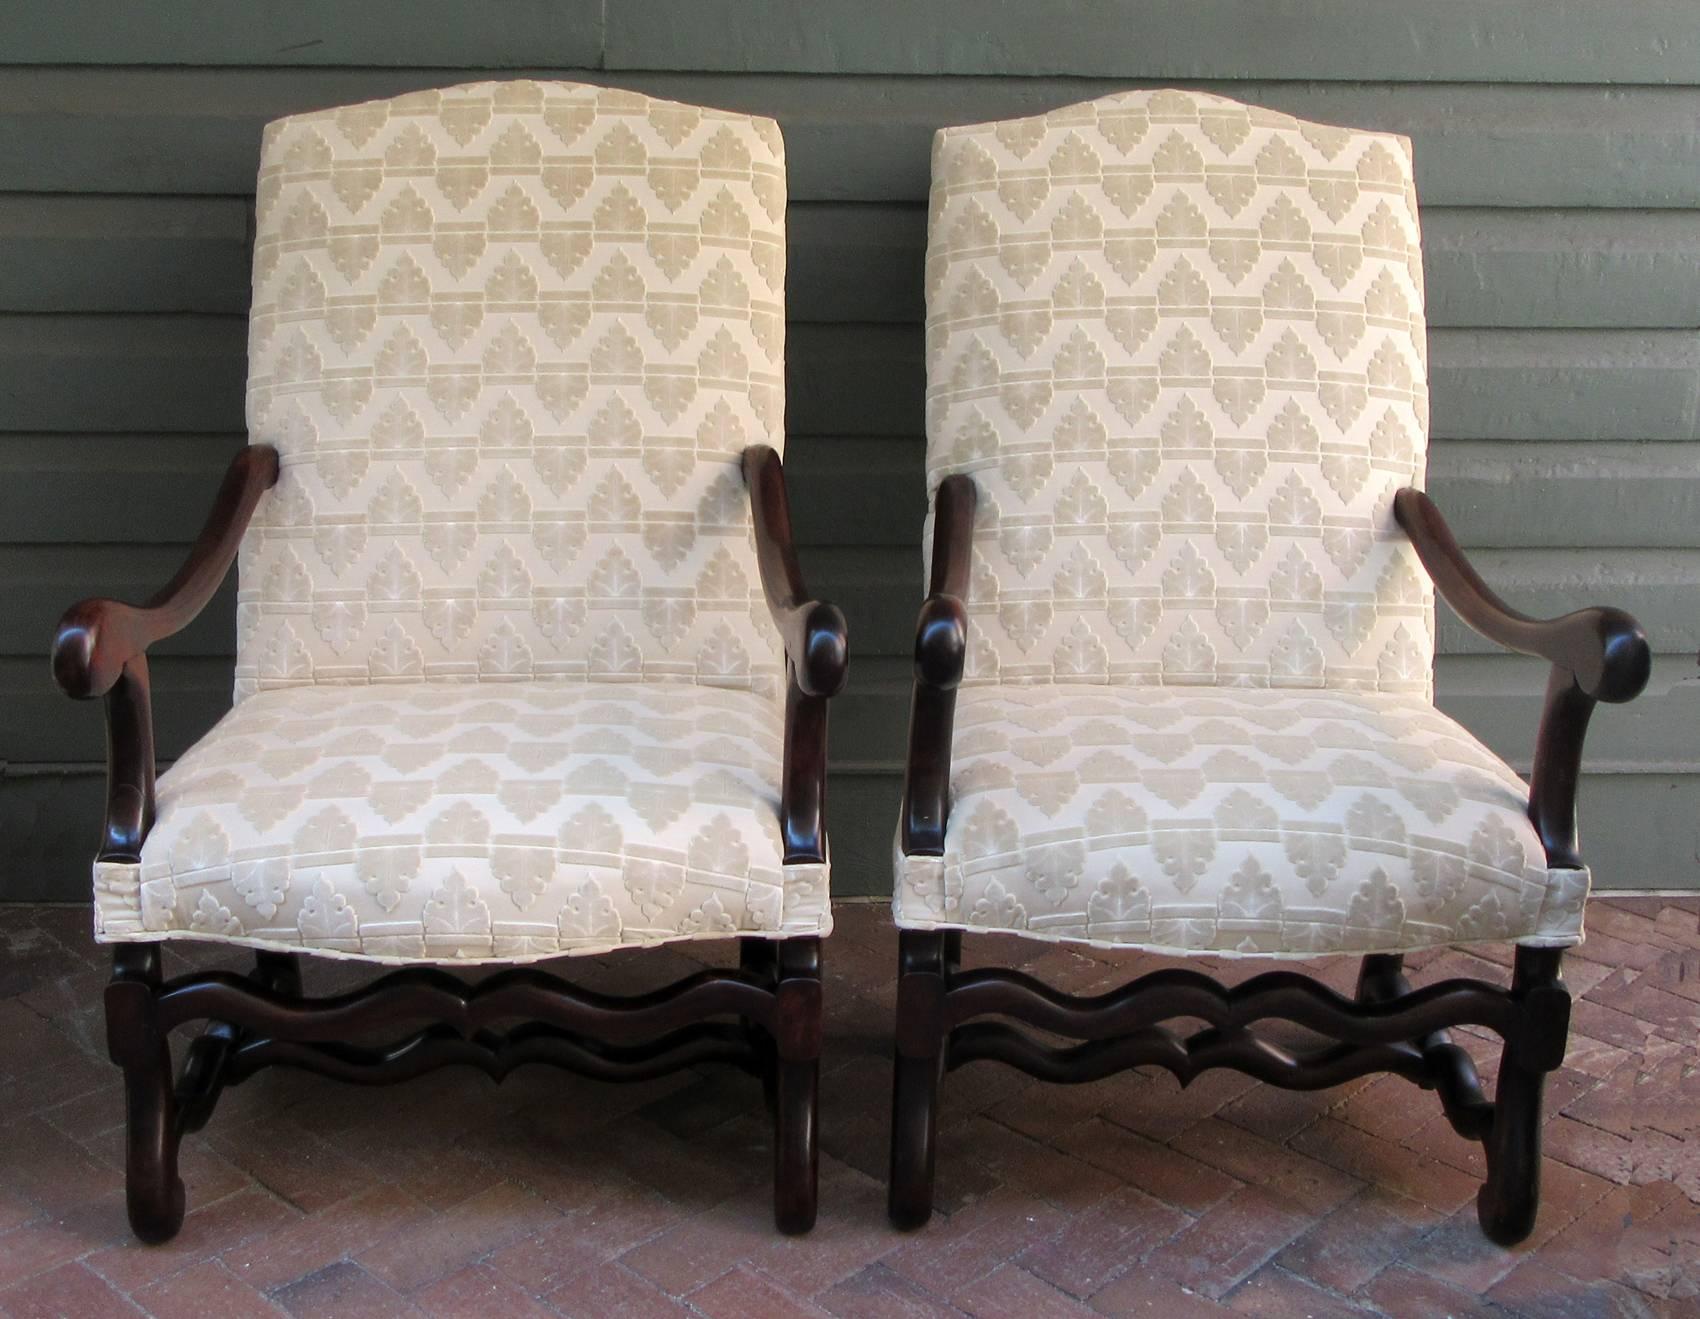 A handsome pair of French Louis XIII style Os de Mouton walnut armchairs, circa 1820, with ivory cut velvet upholstery and dark stain finish.